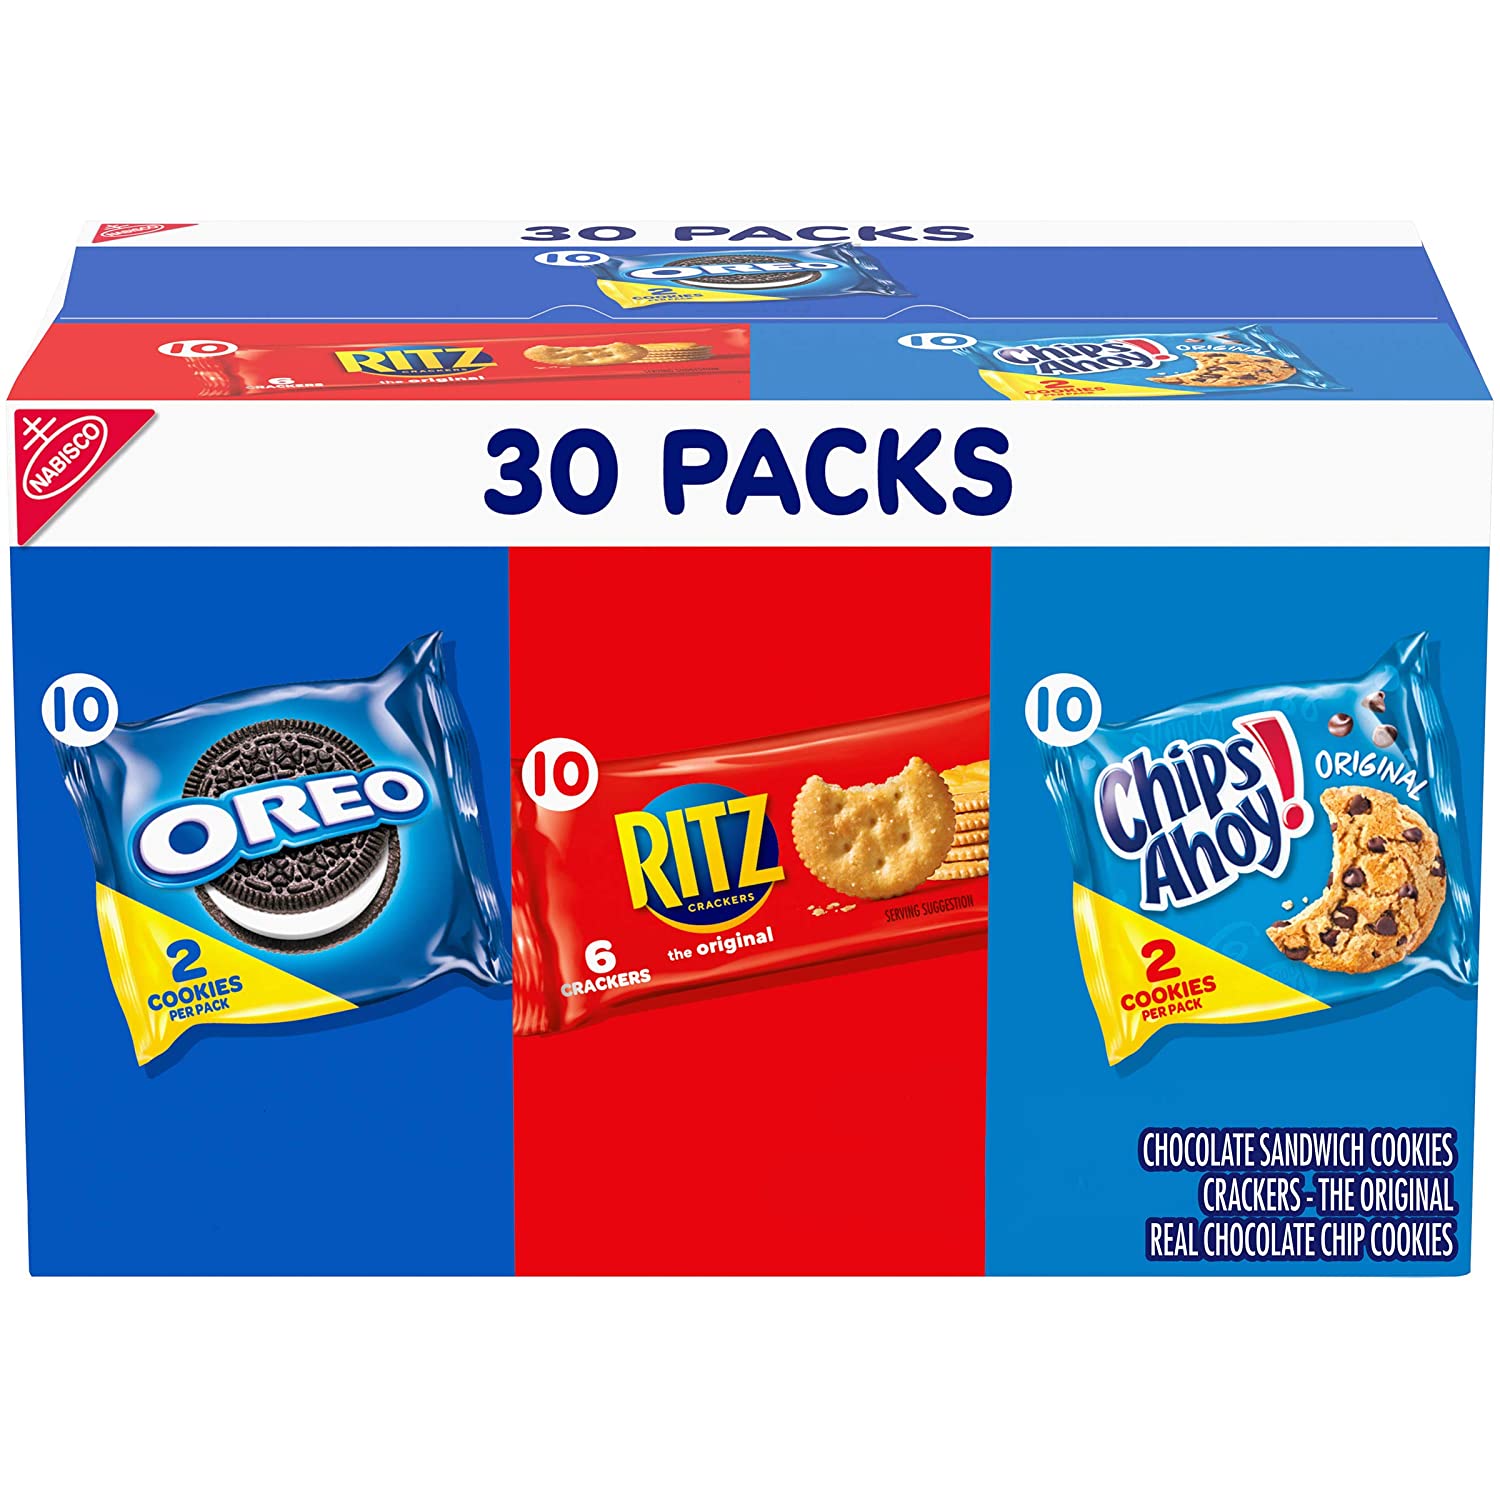 30 Packs Nabisco Cookies & Cracker Variety Pack, OREO, RITZ & CHIPS AHOY!, $8.24 + Free Shipping